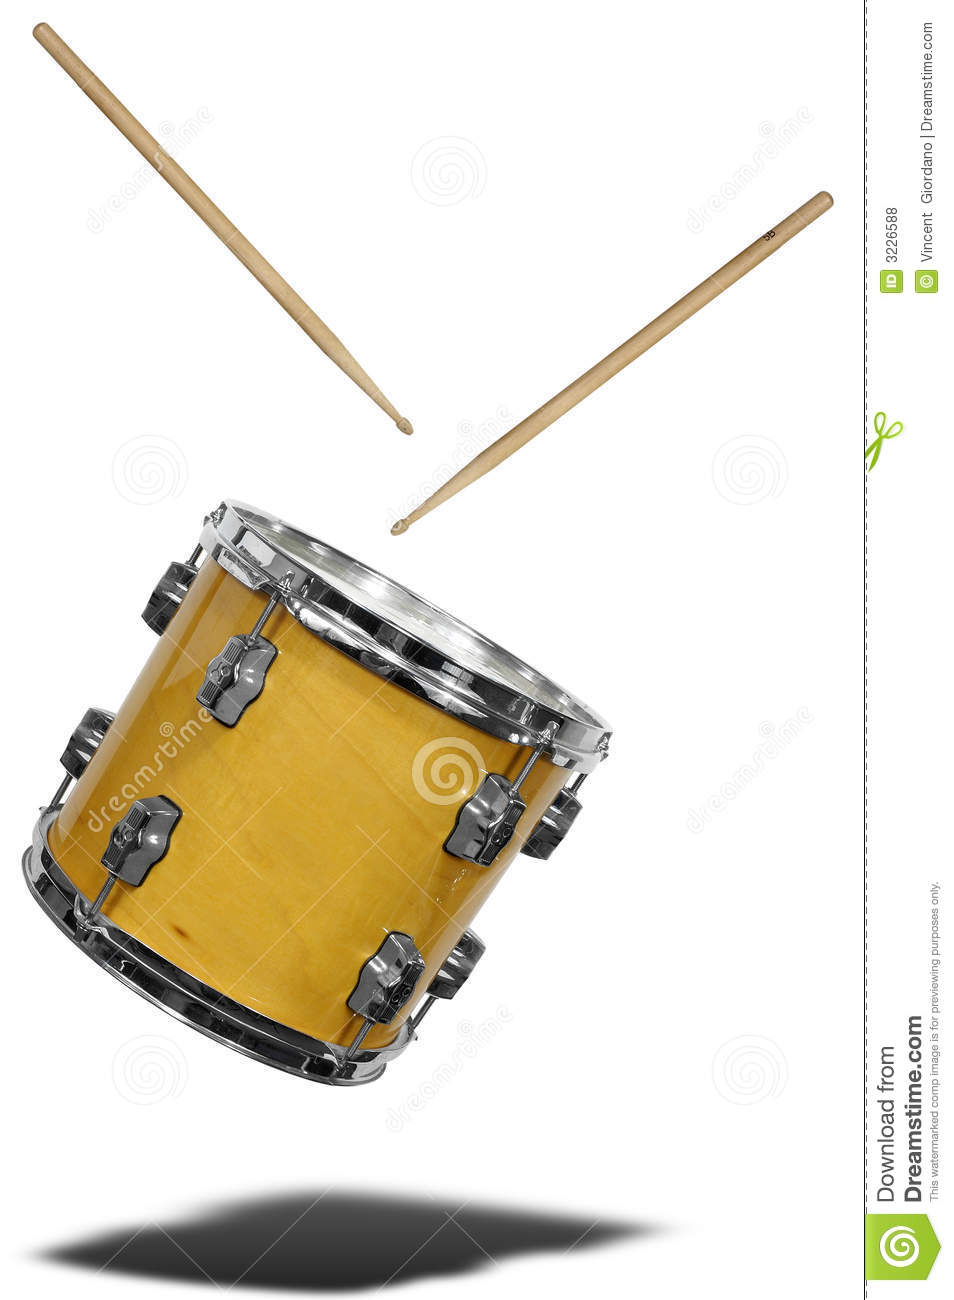 View Of A Snare Drum Floating With Drum Sticks Isolated Over White